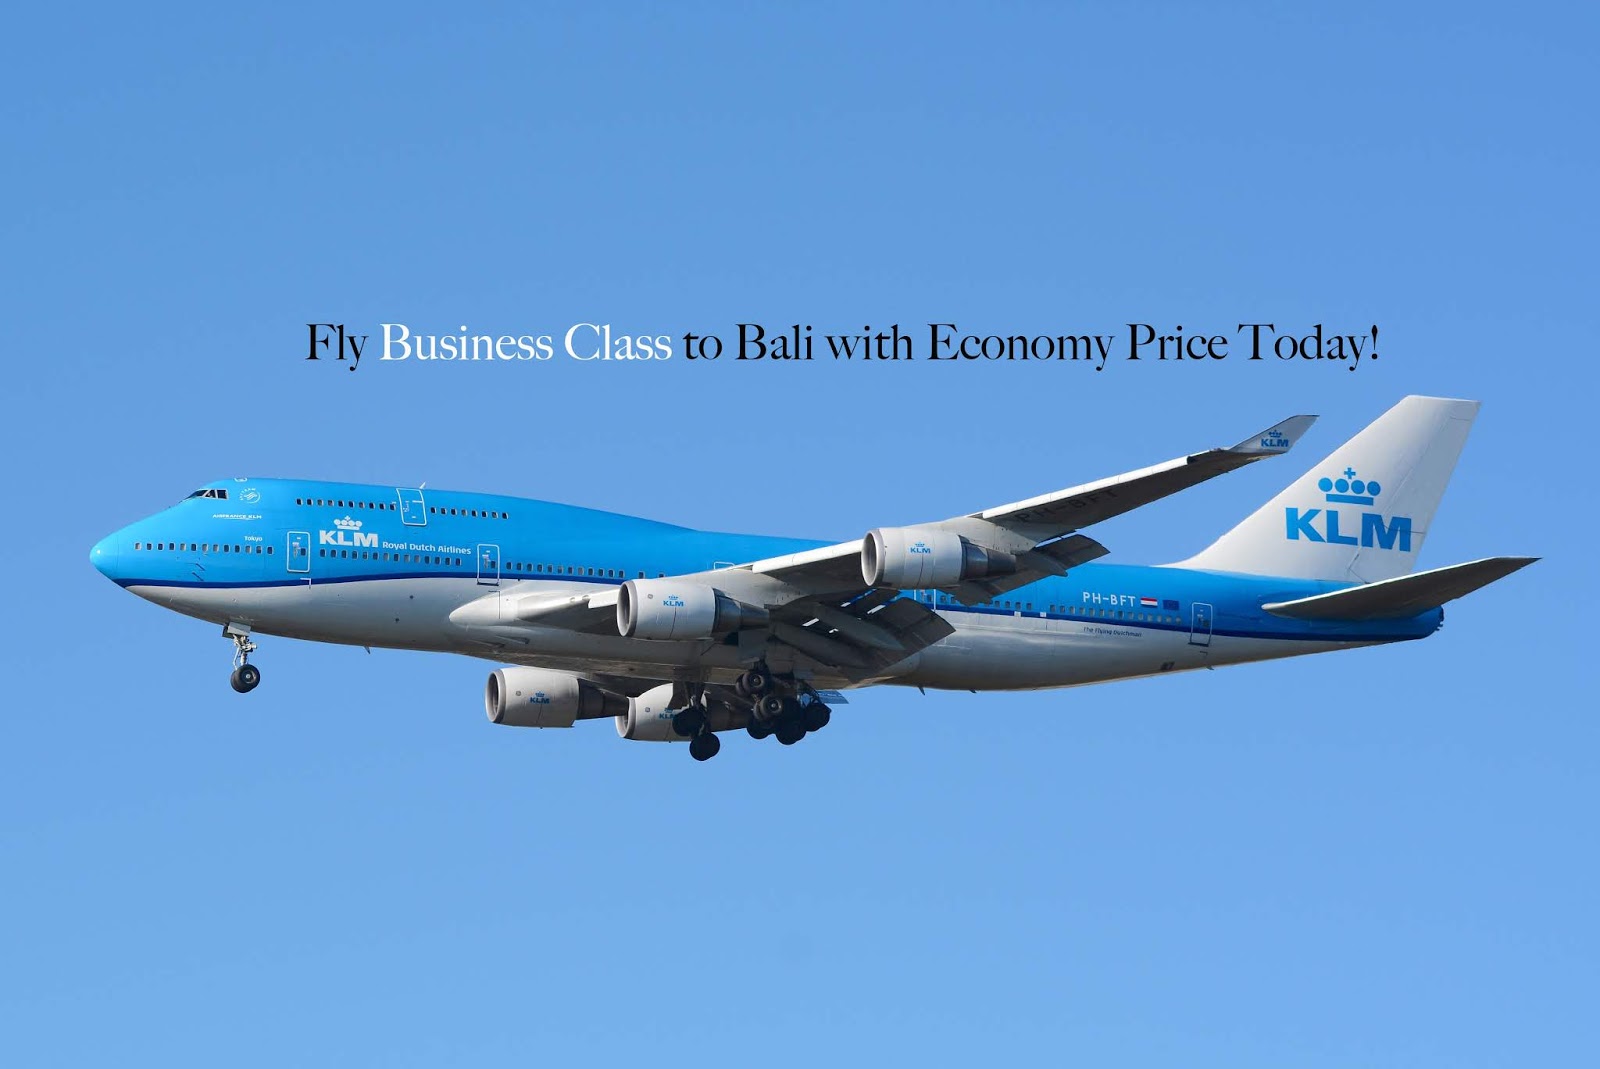 Fly Business Class to Bali with Economy Price today!